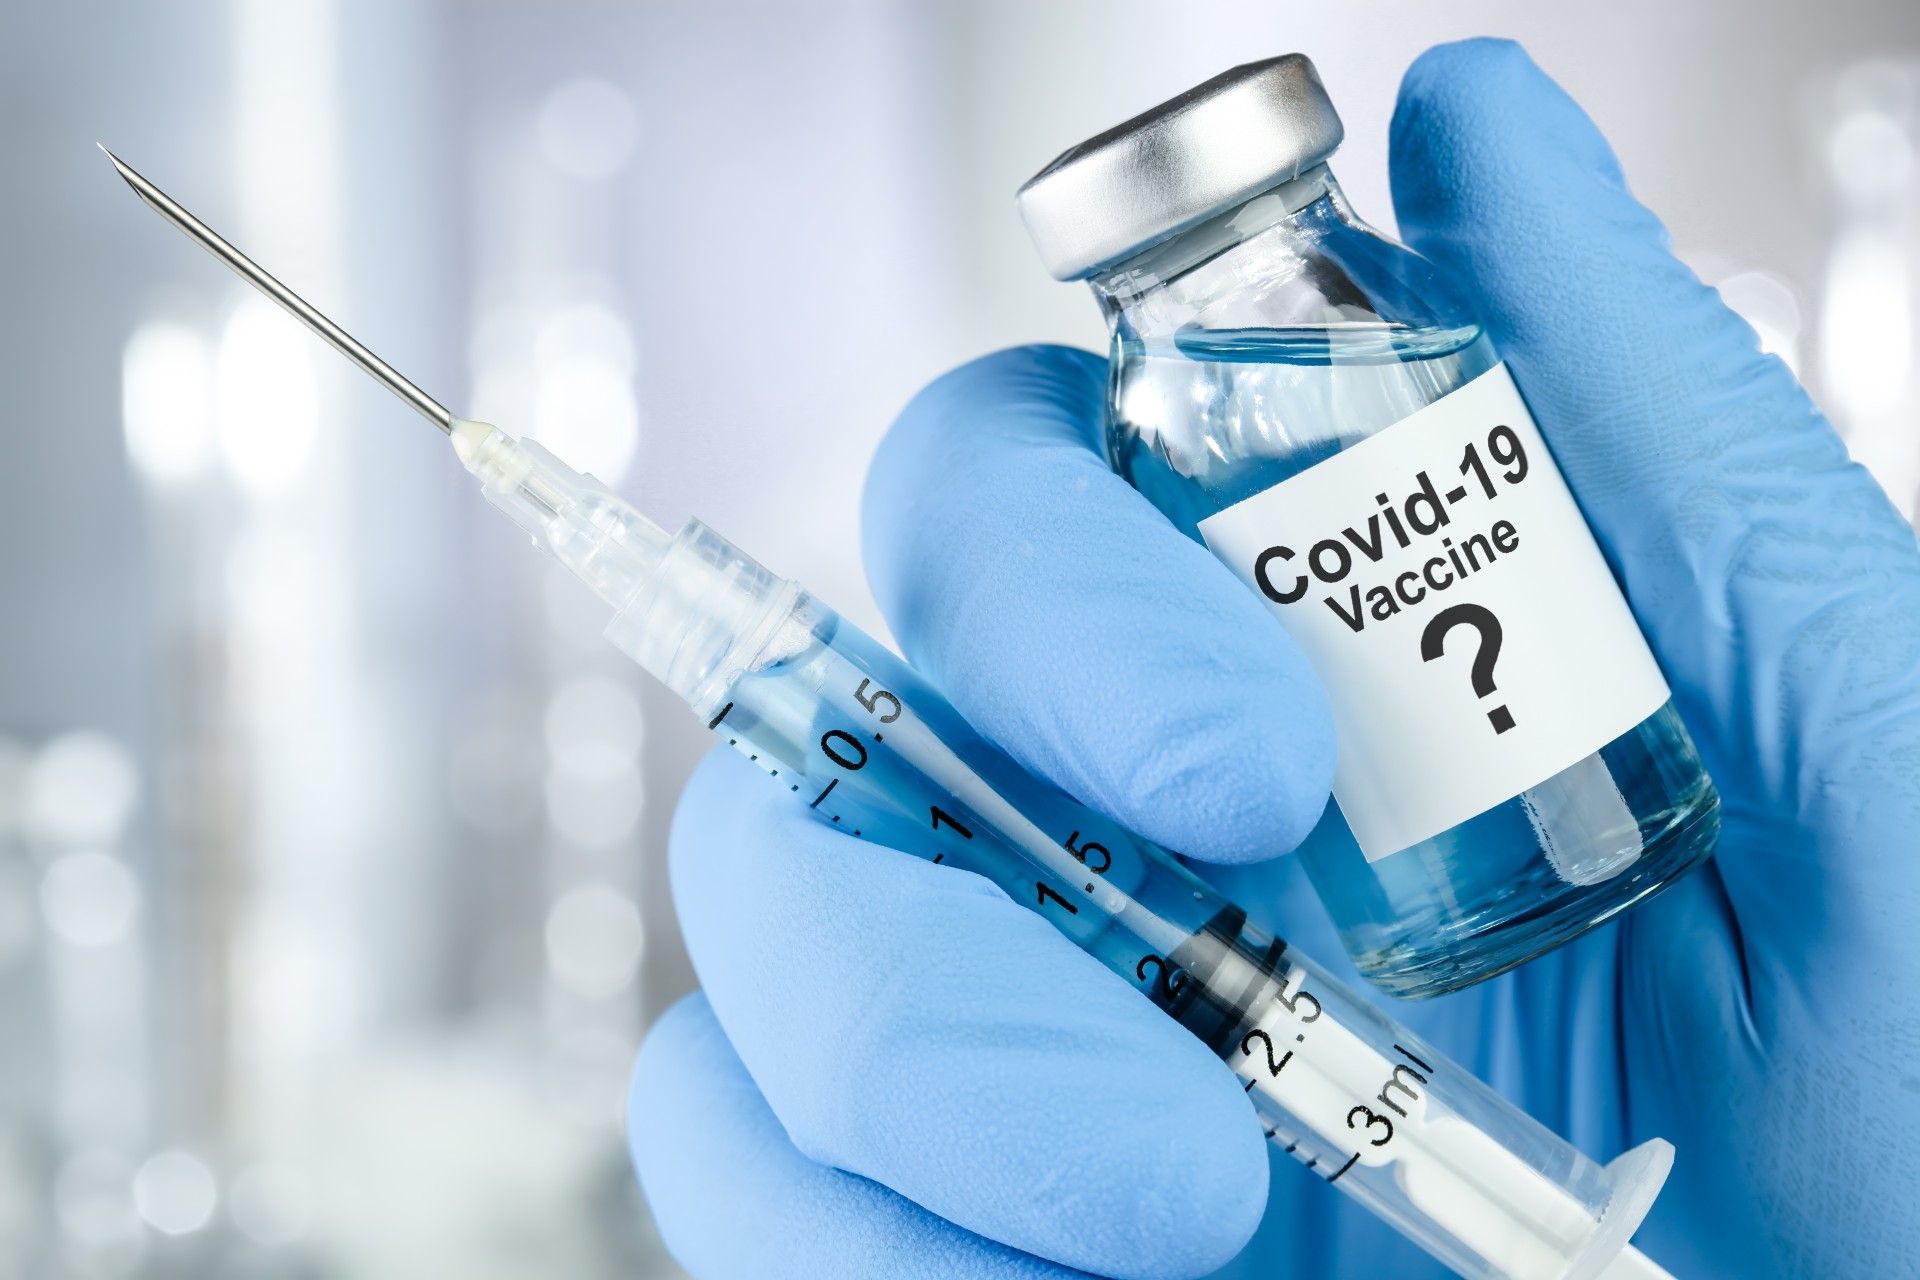 A blue-gloved hand holds a syringe and a vaccine bottle with a label that reads "Covid-19 Vaccine?" - coronavirus vaccine